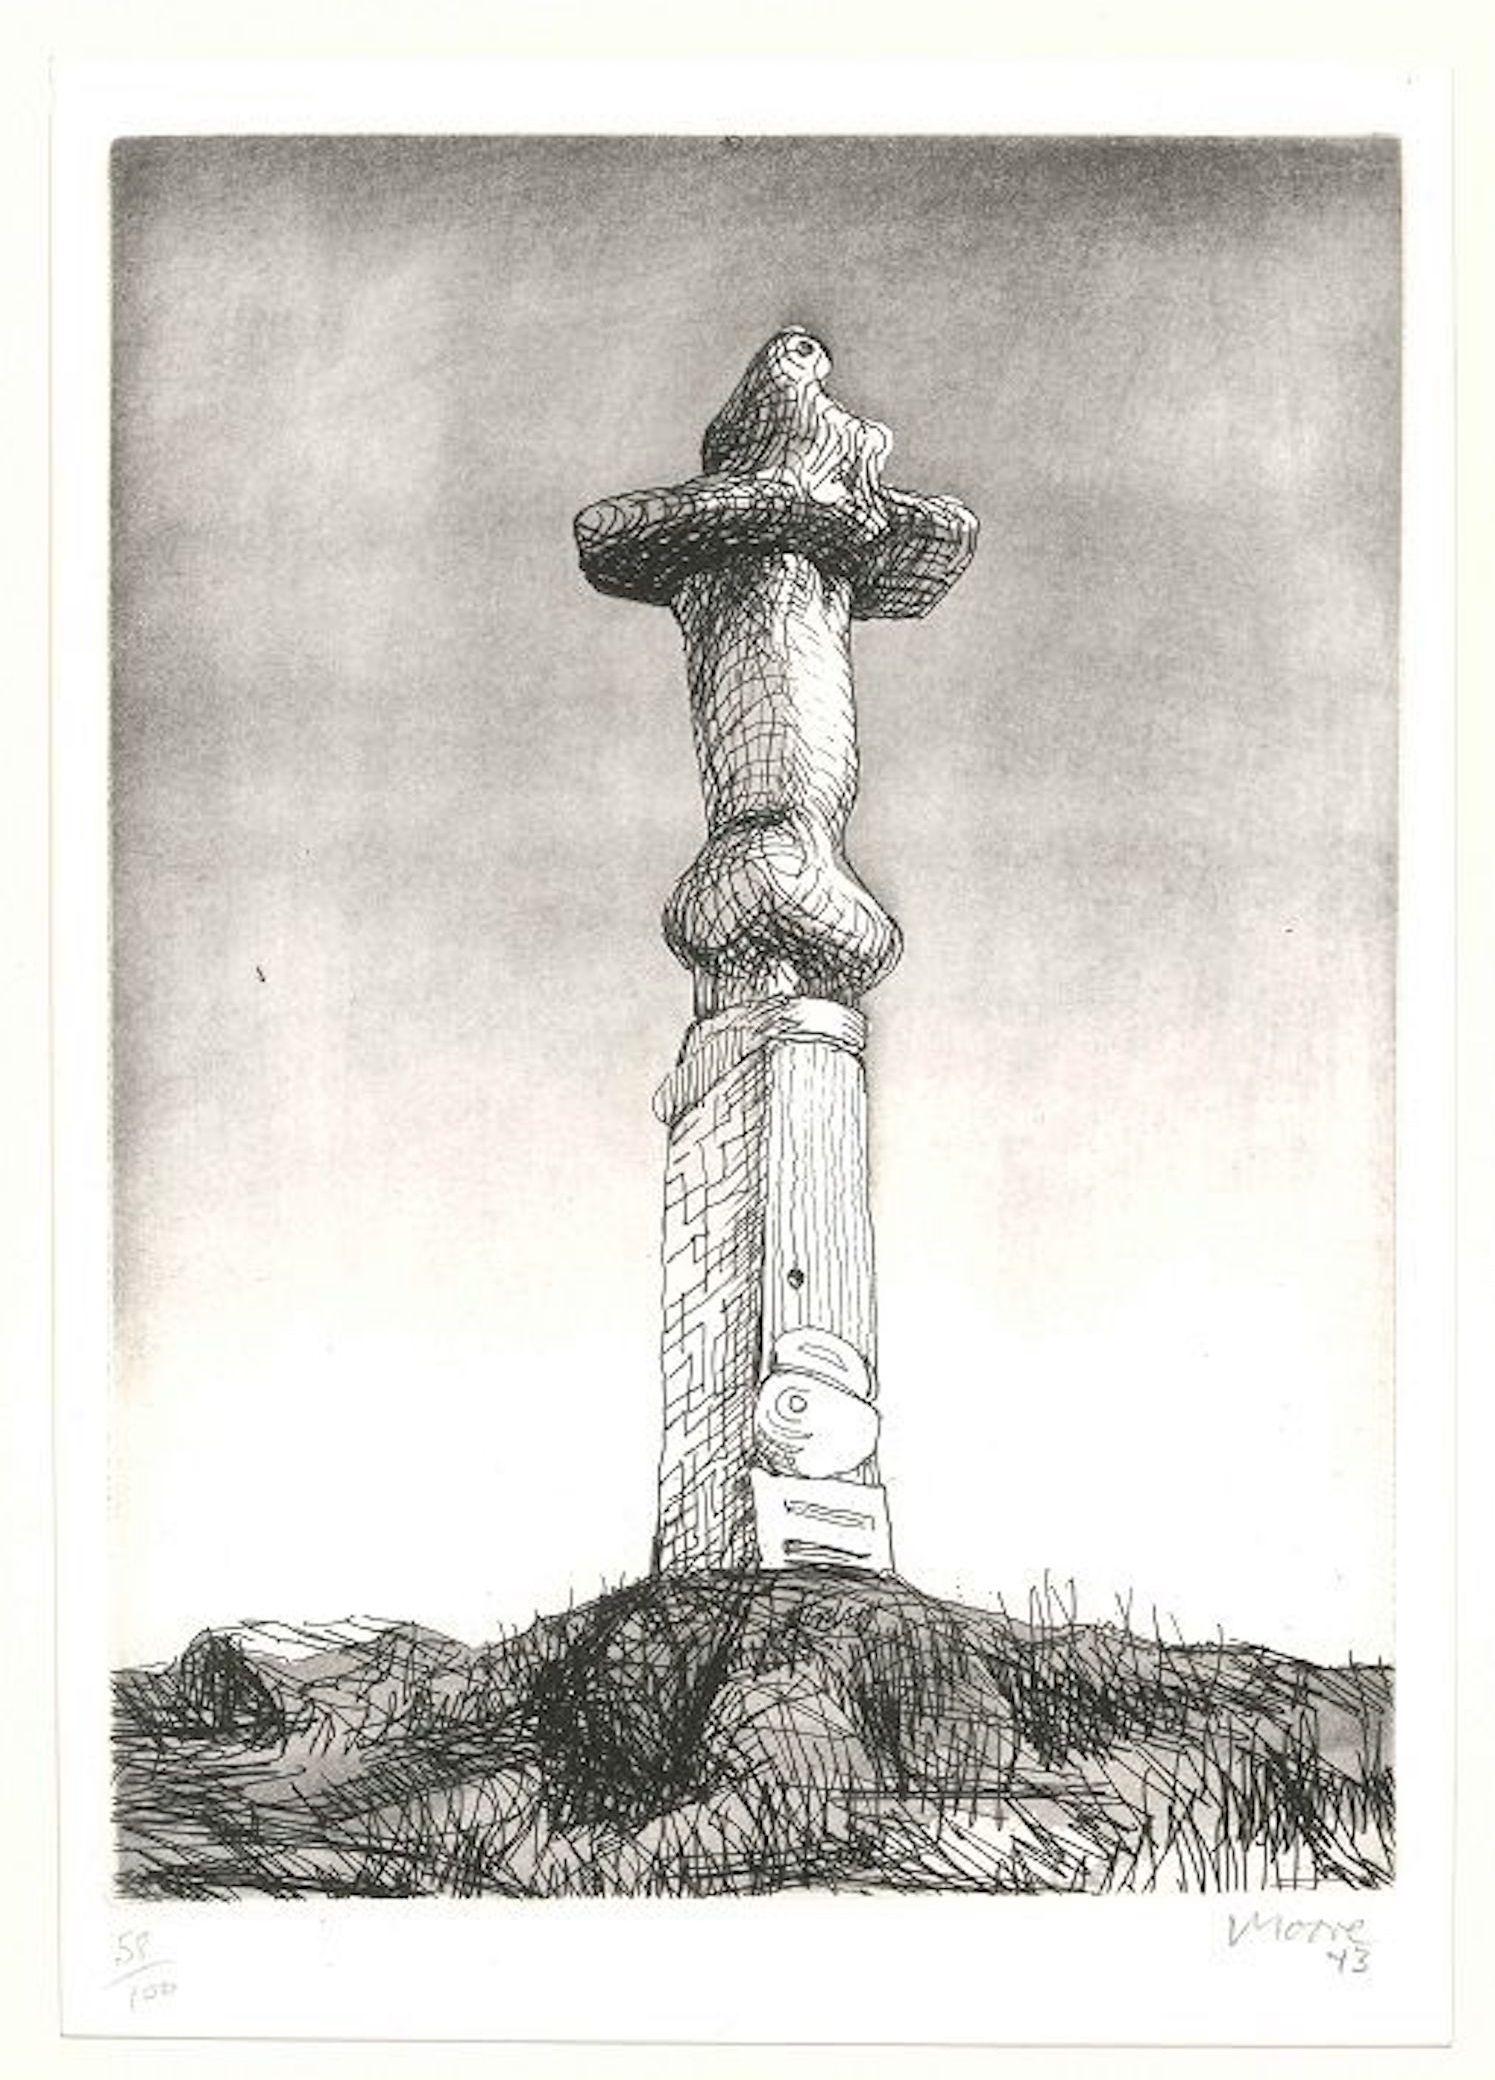 Image dimensions: 22 x 16 cm.

This artwork by Henry Moore is hand signed, numbered and dated. This original aquatint is from an edition of 100 prints. This wonderful etching represents the famous bronze sculpture, Glenkiln Cross. This original